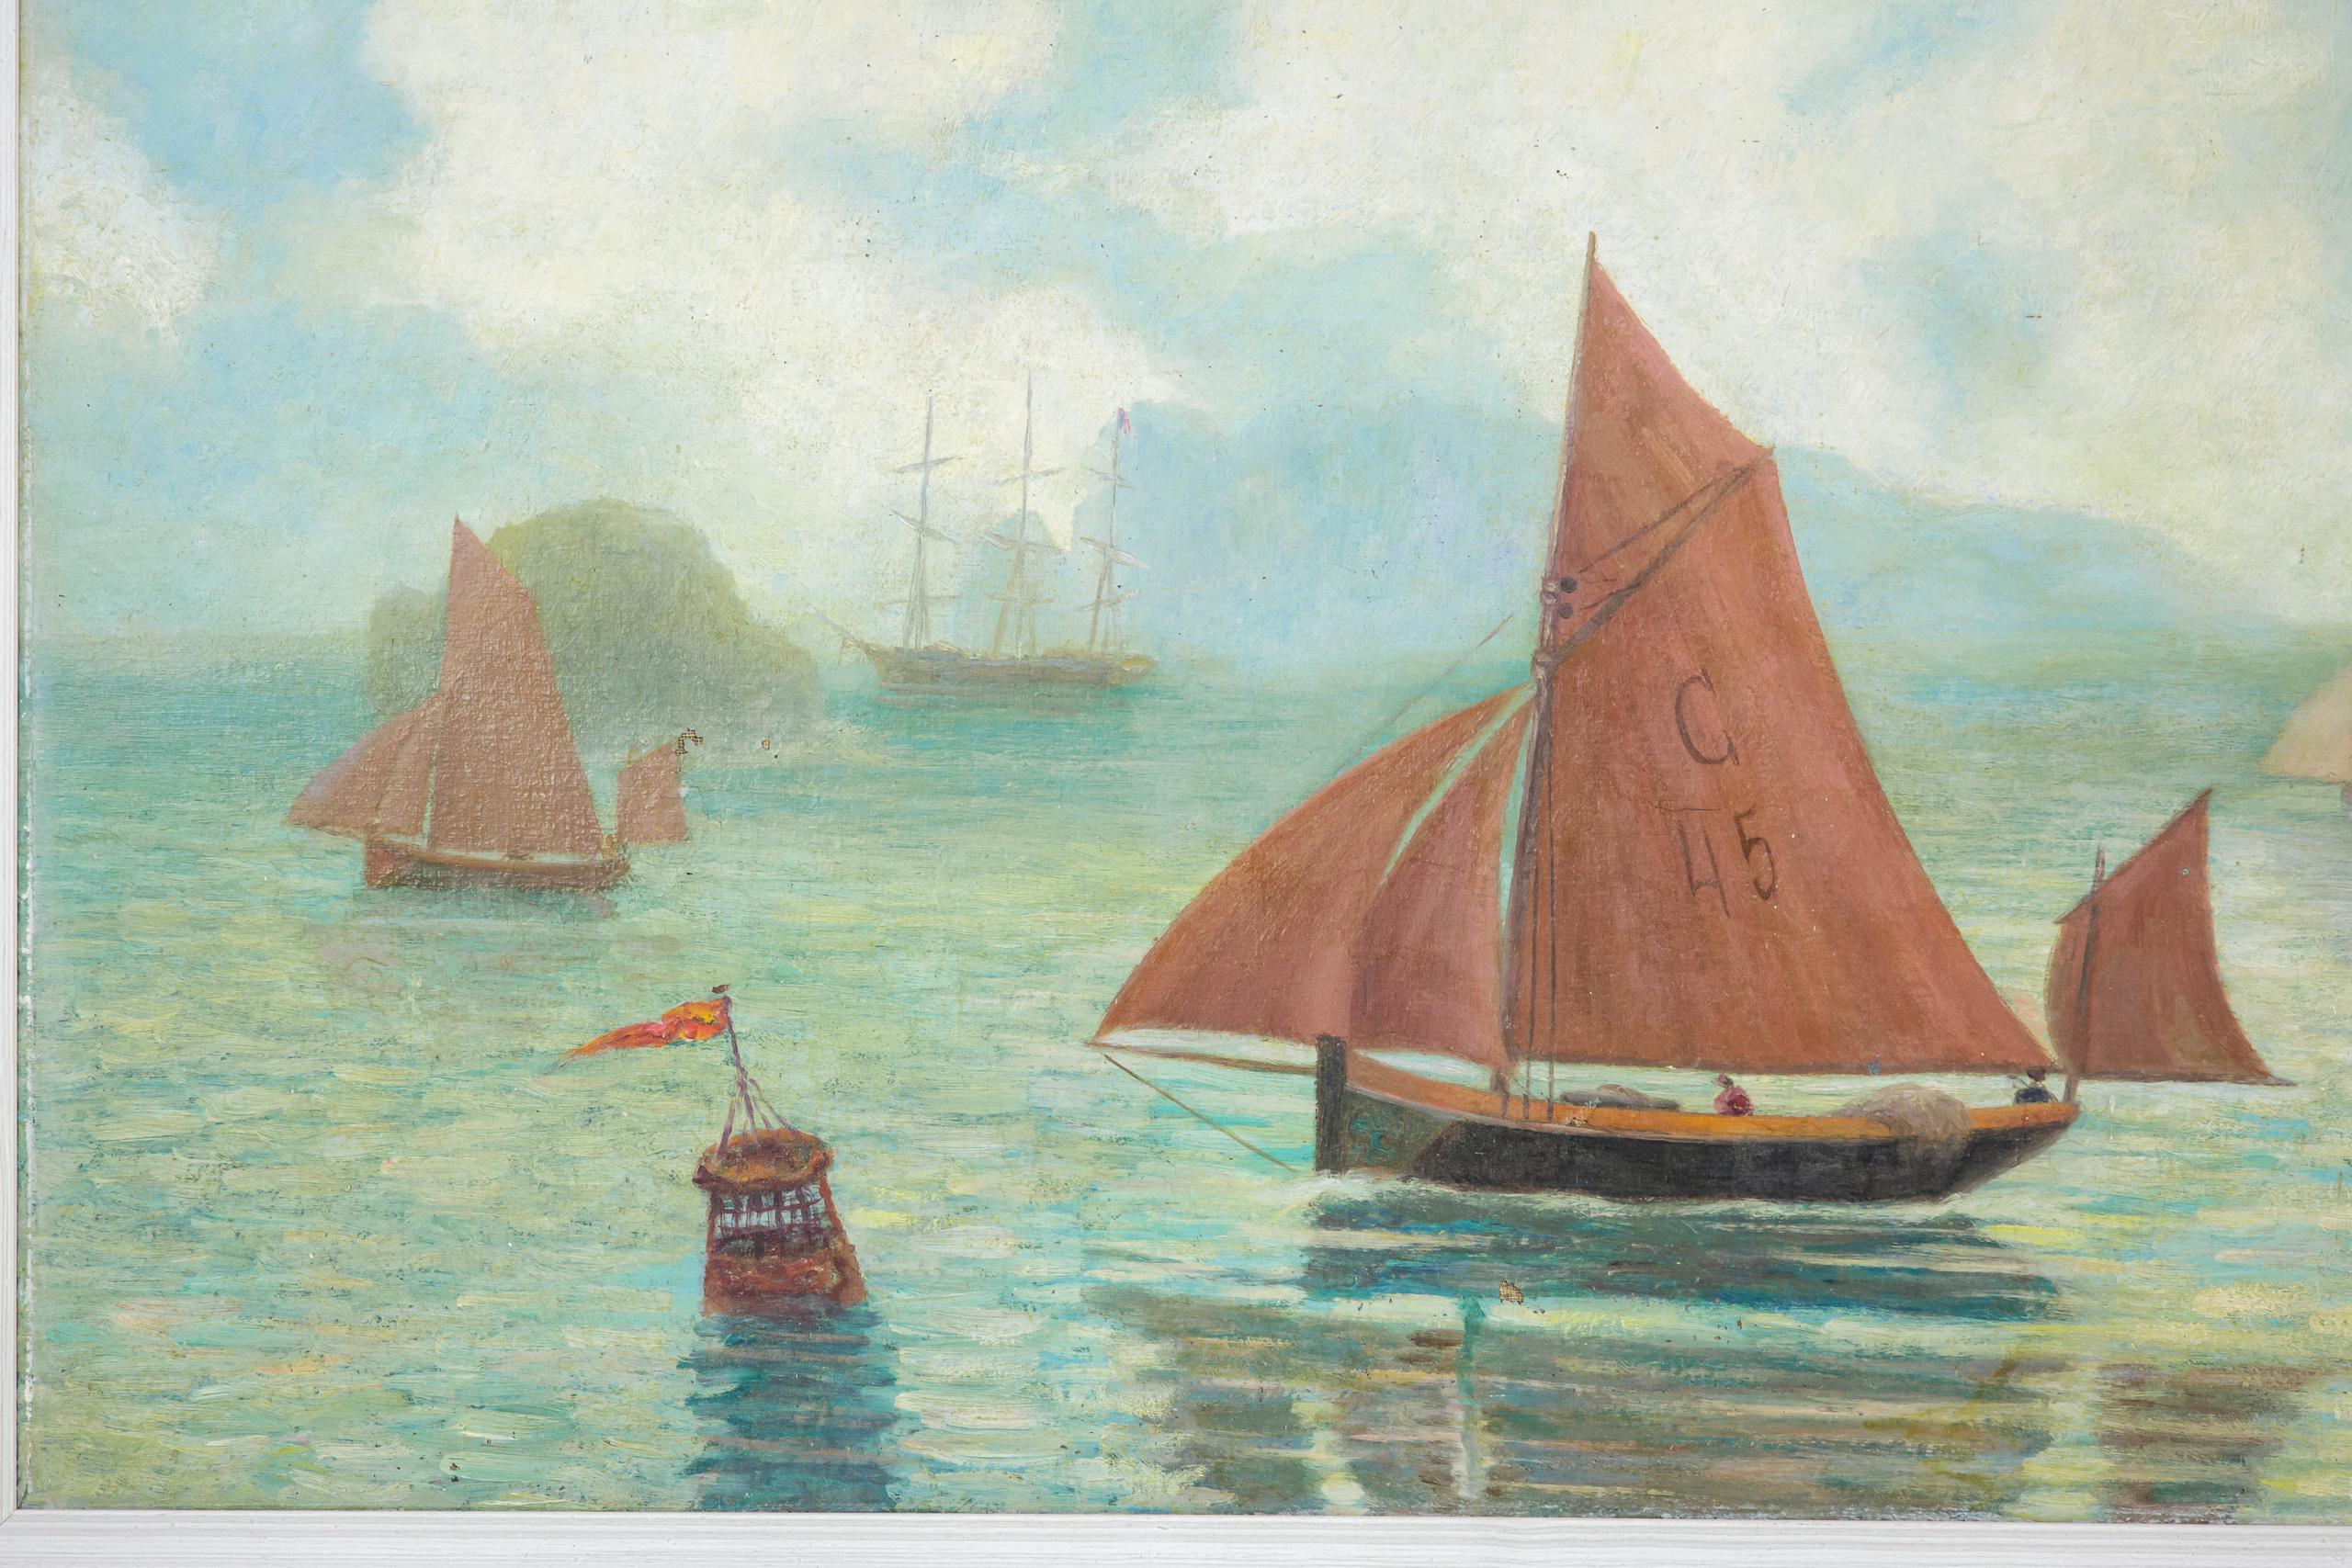 Large Oil on Canvas Sailing Dinghy Scene by L Dumouchel 1949 In Fair Condition For Sale In Pease pottage, West Sussex